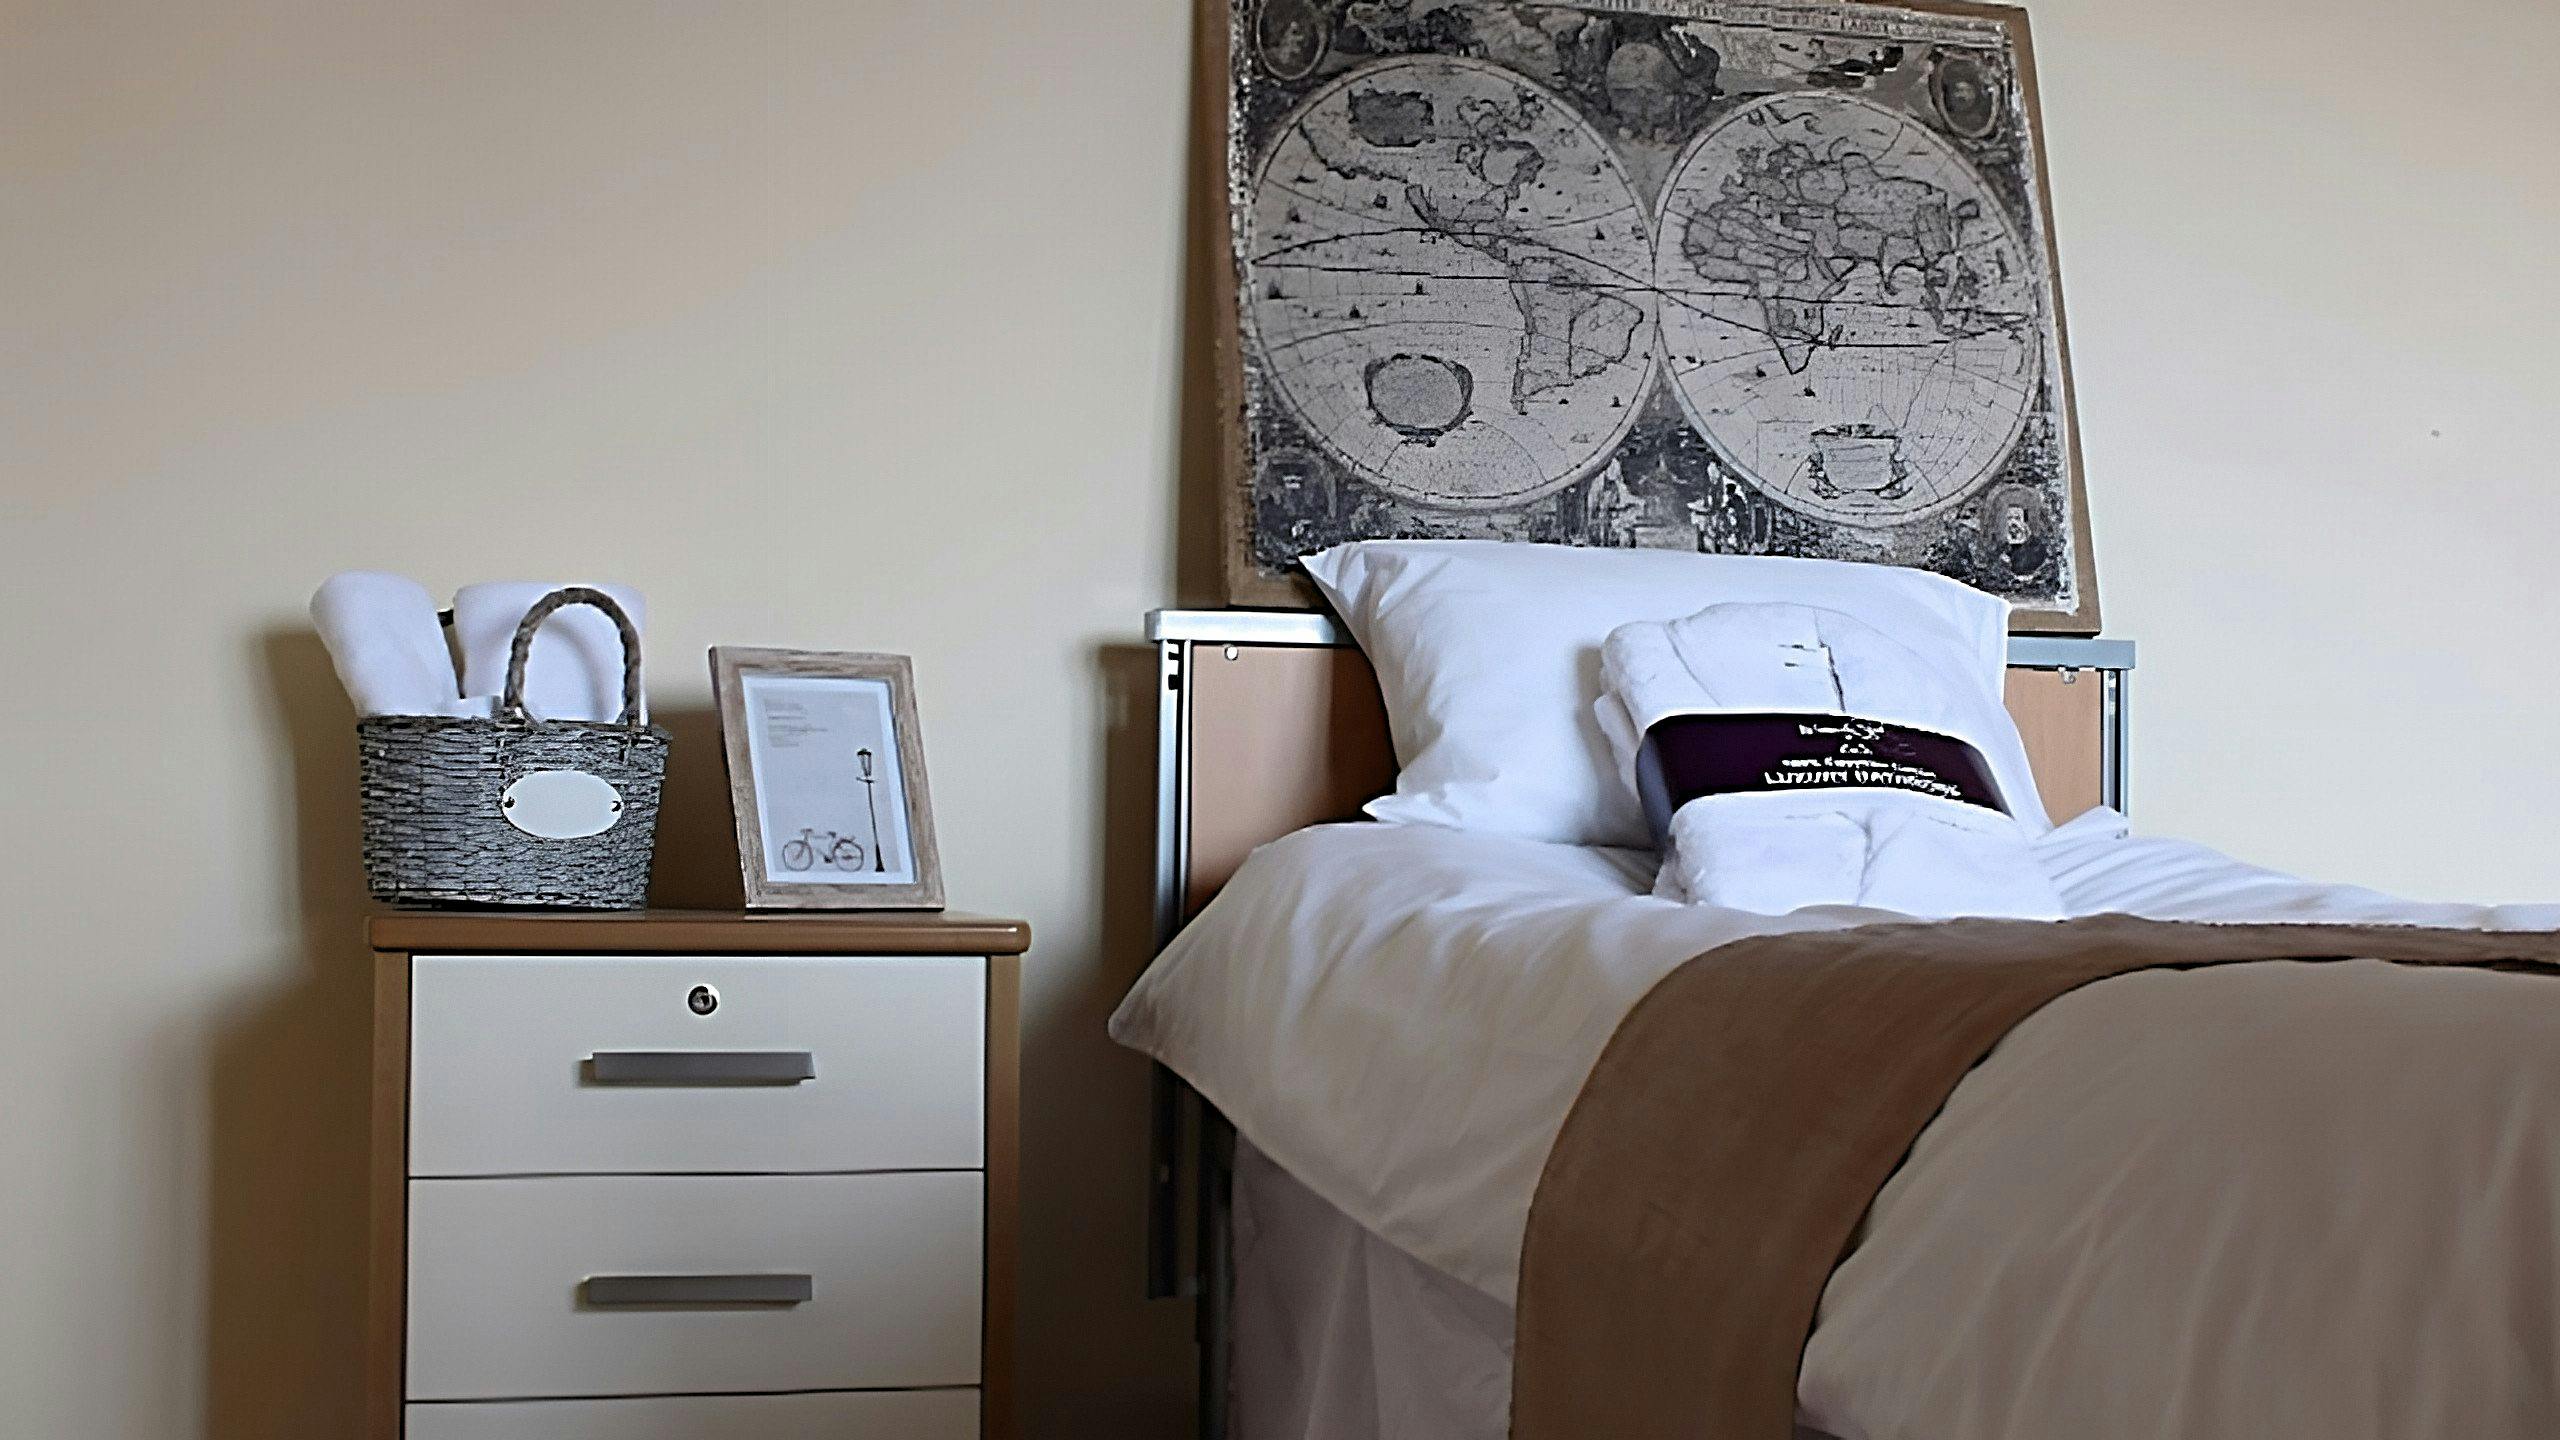 Bedroom at Barnes Court Care Home in Sunderland, Tyne and Wear